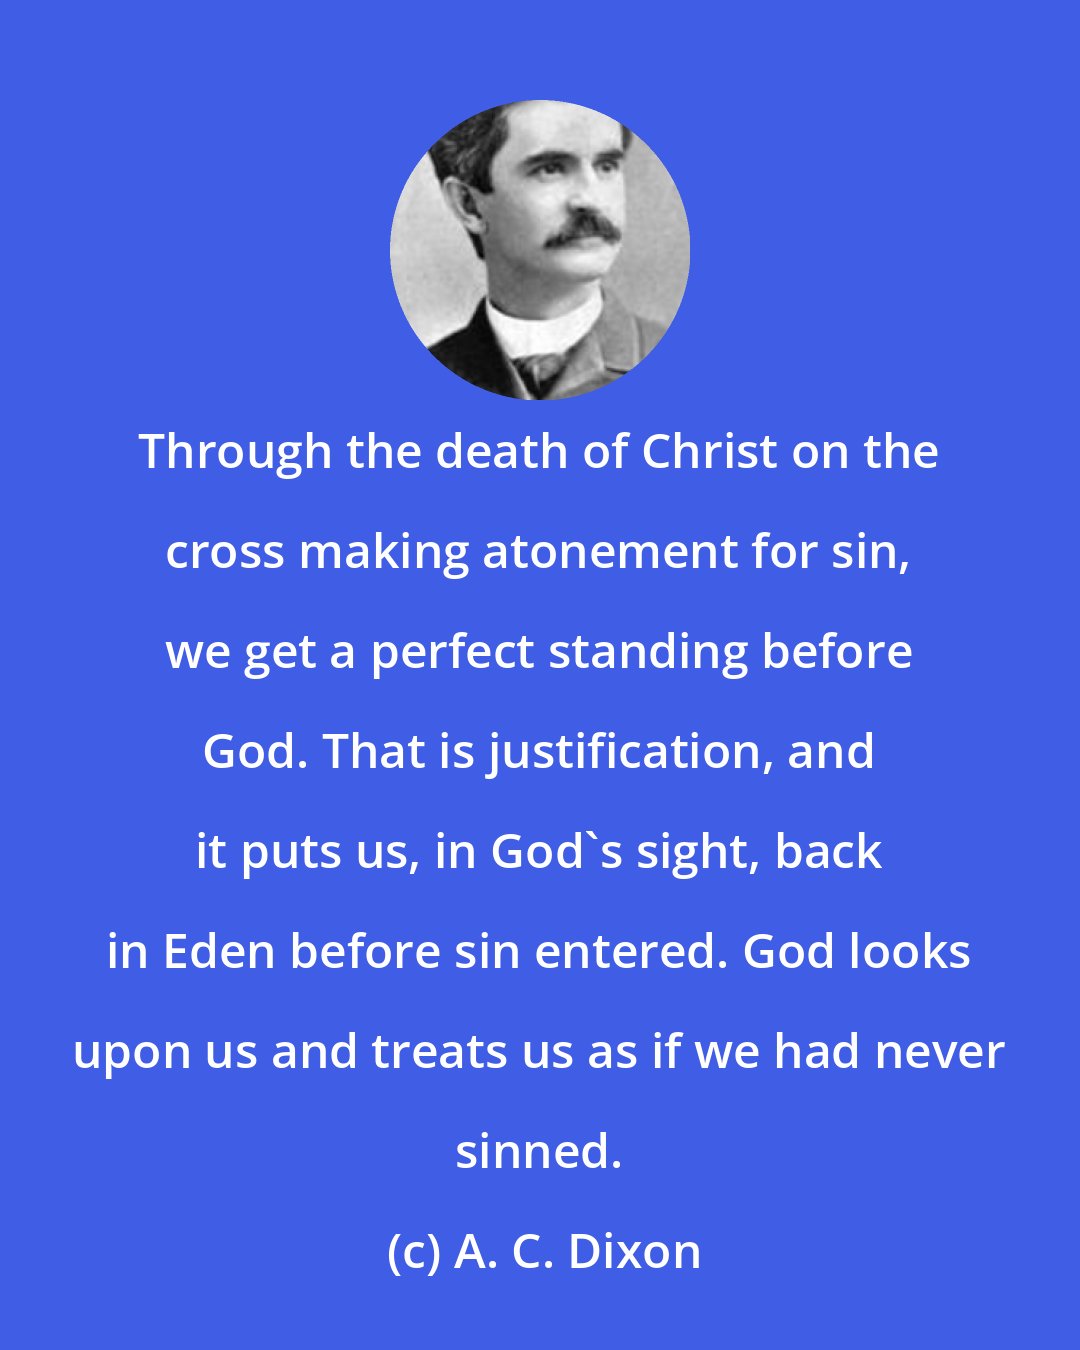 A. C. Dixon: Through the death of Christ on the cross making atonement for sin, we get a perfect standing before God. That is justification, and it puts us, in God's sight, back in Eden before sin entered. God looks upon us and treats us as if we had never sinned.